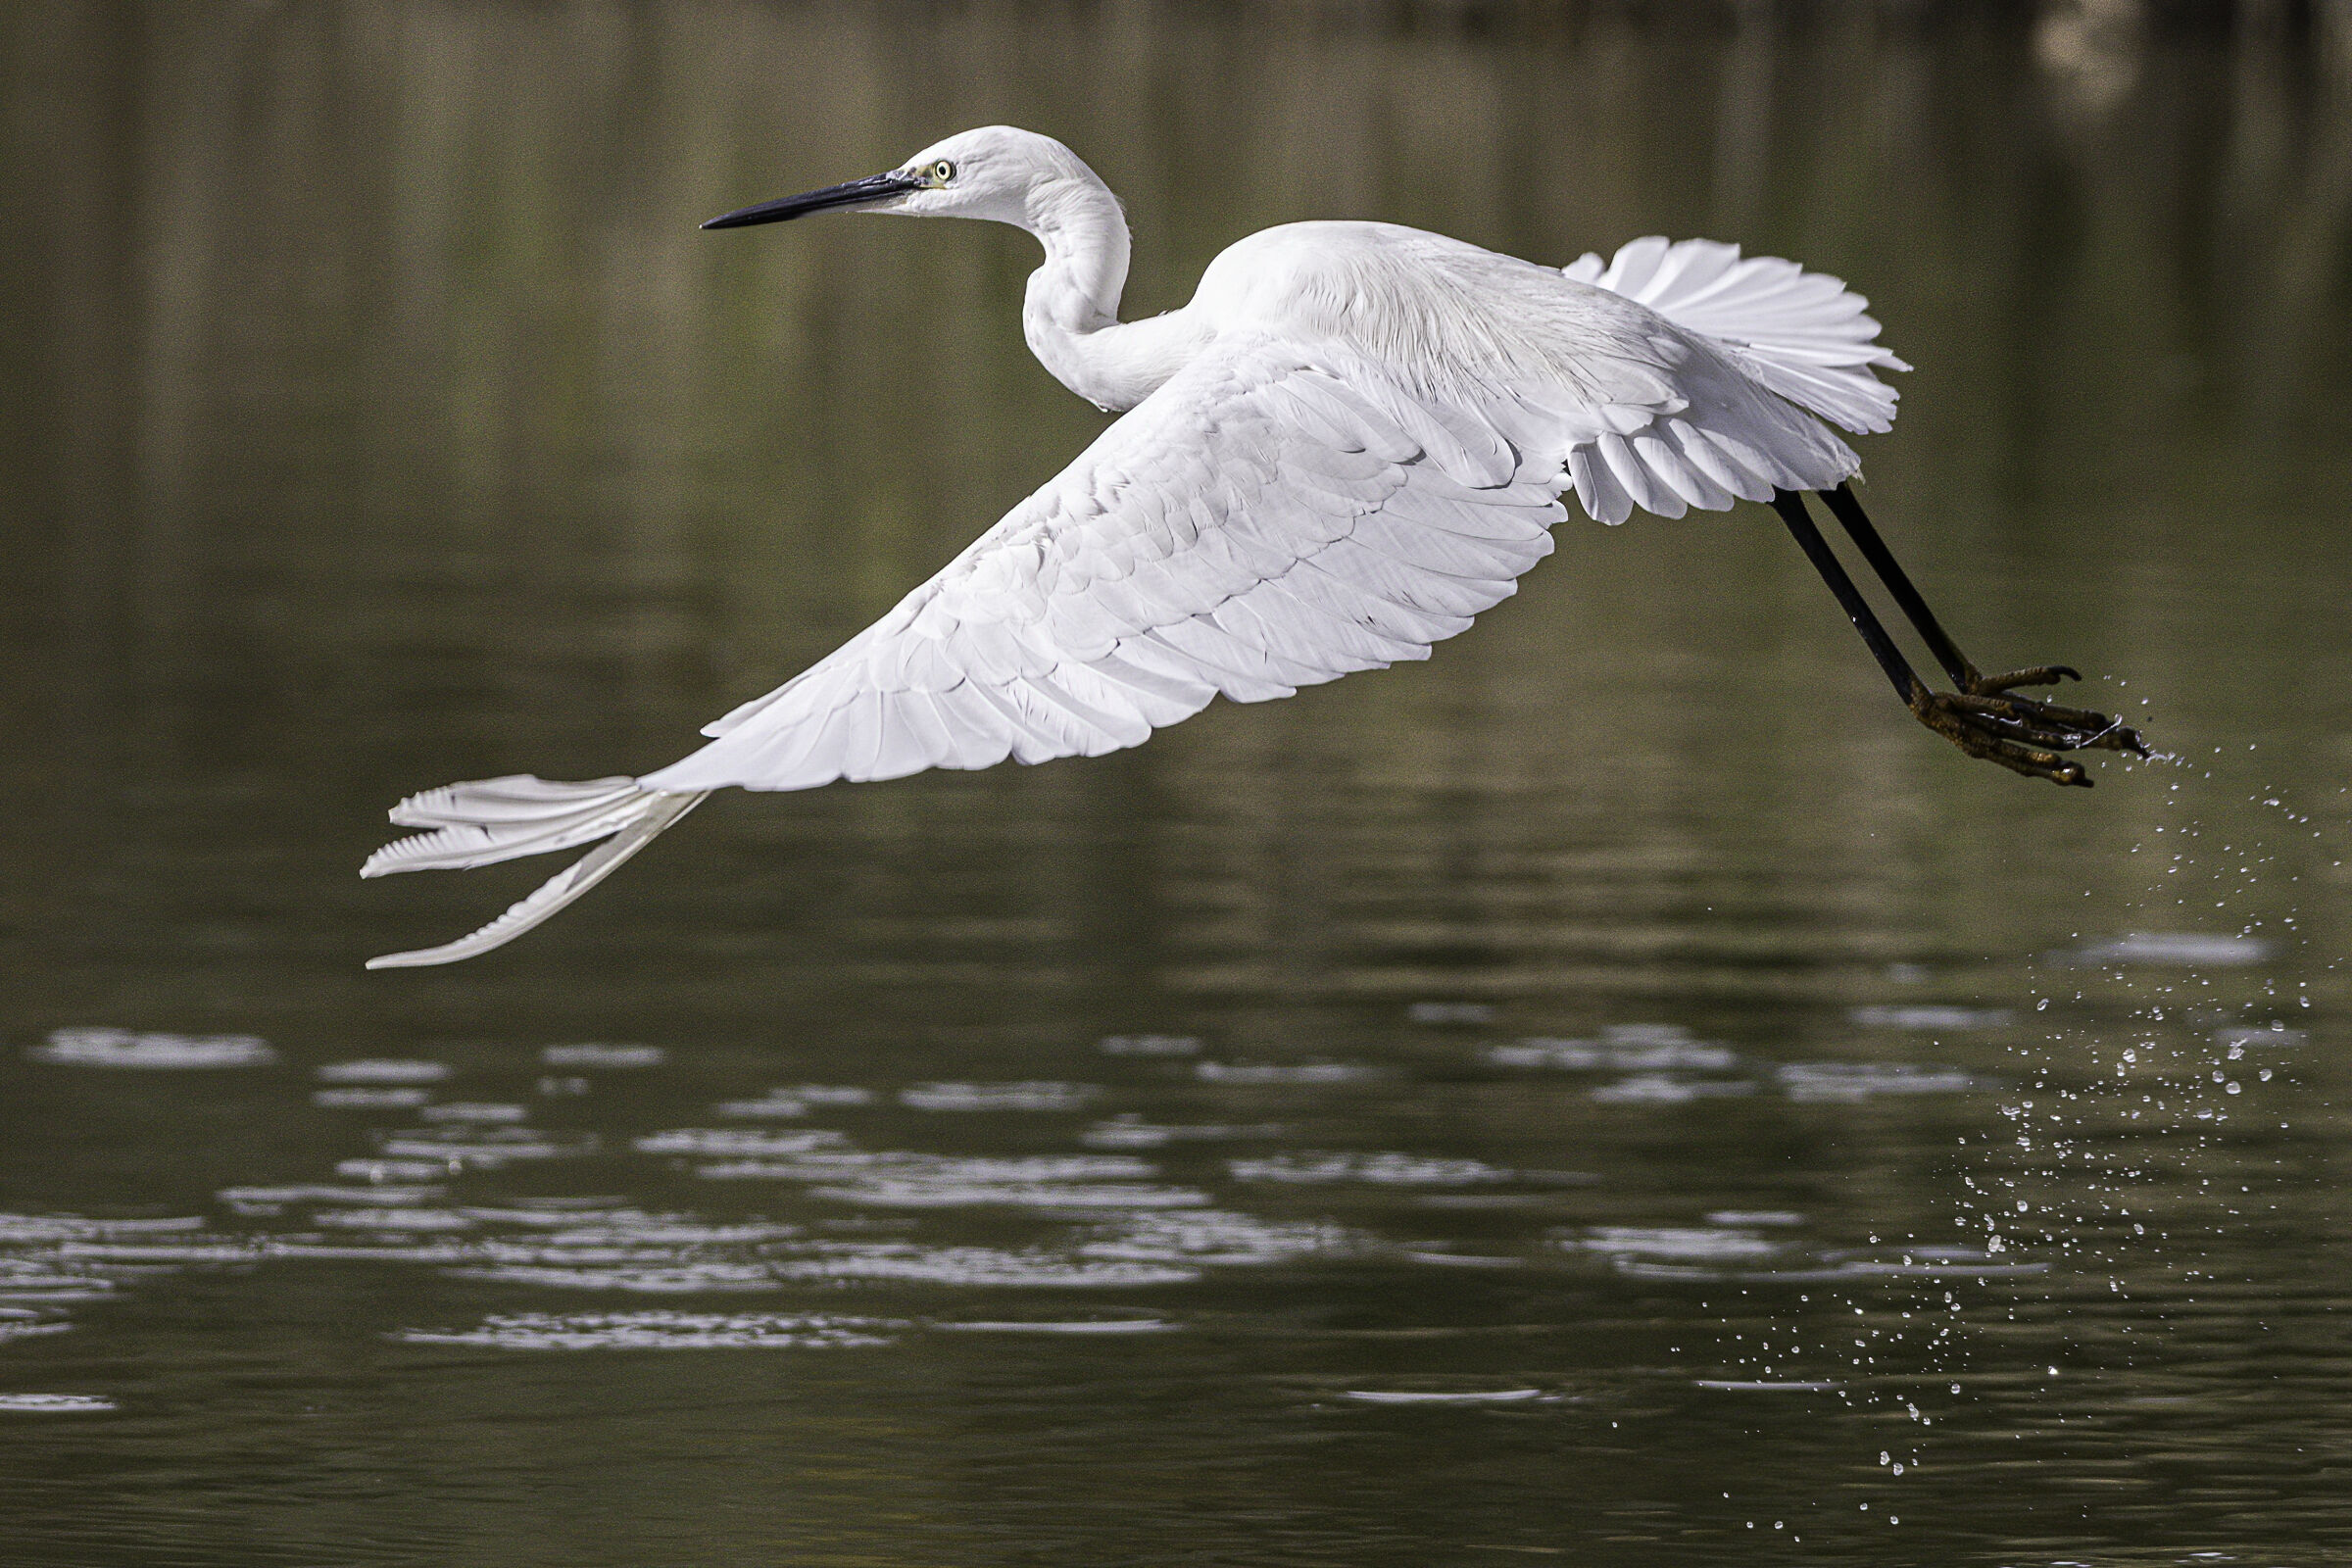 the flight of the egret...